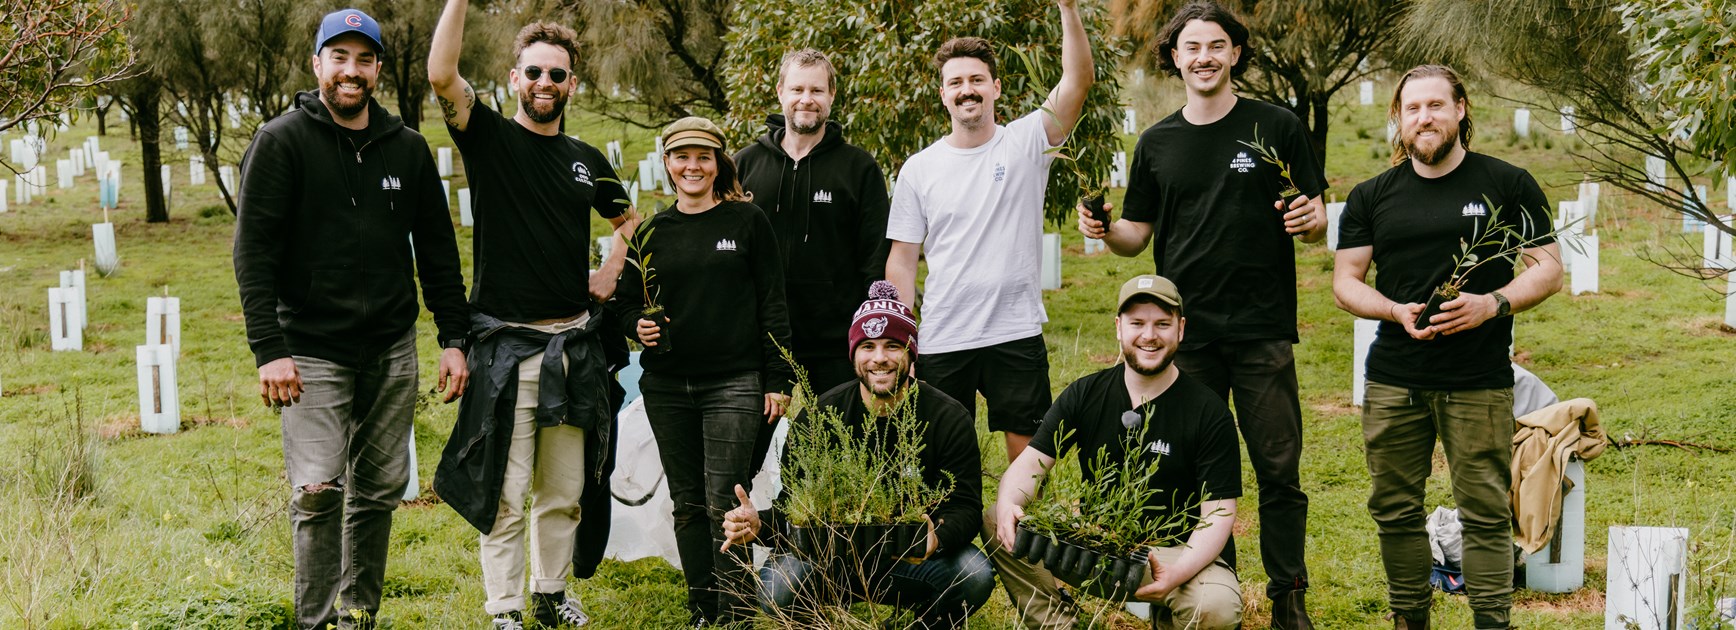 4 Pines pledges 100 trees for every Manly try scored